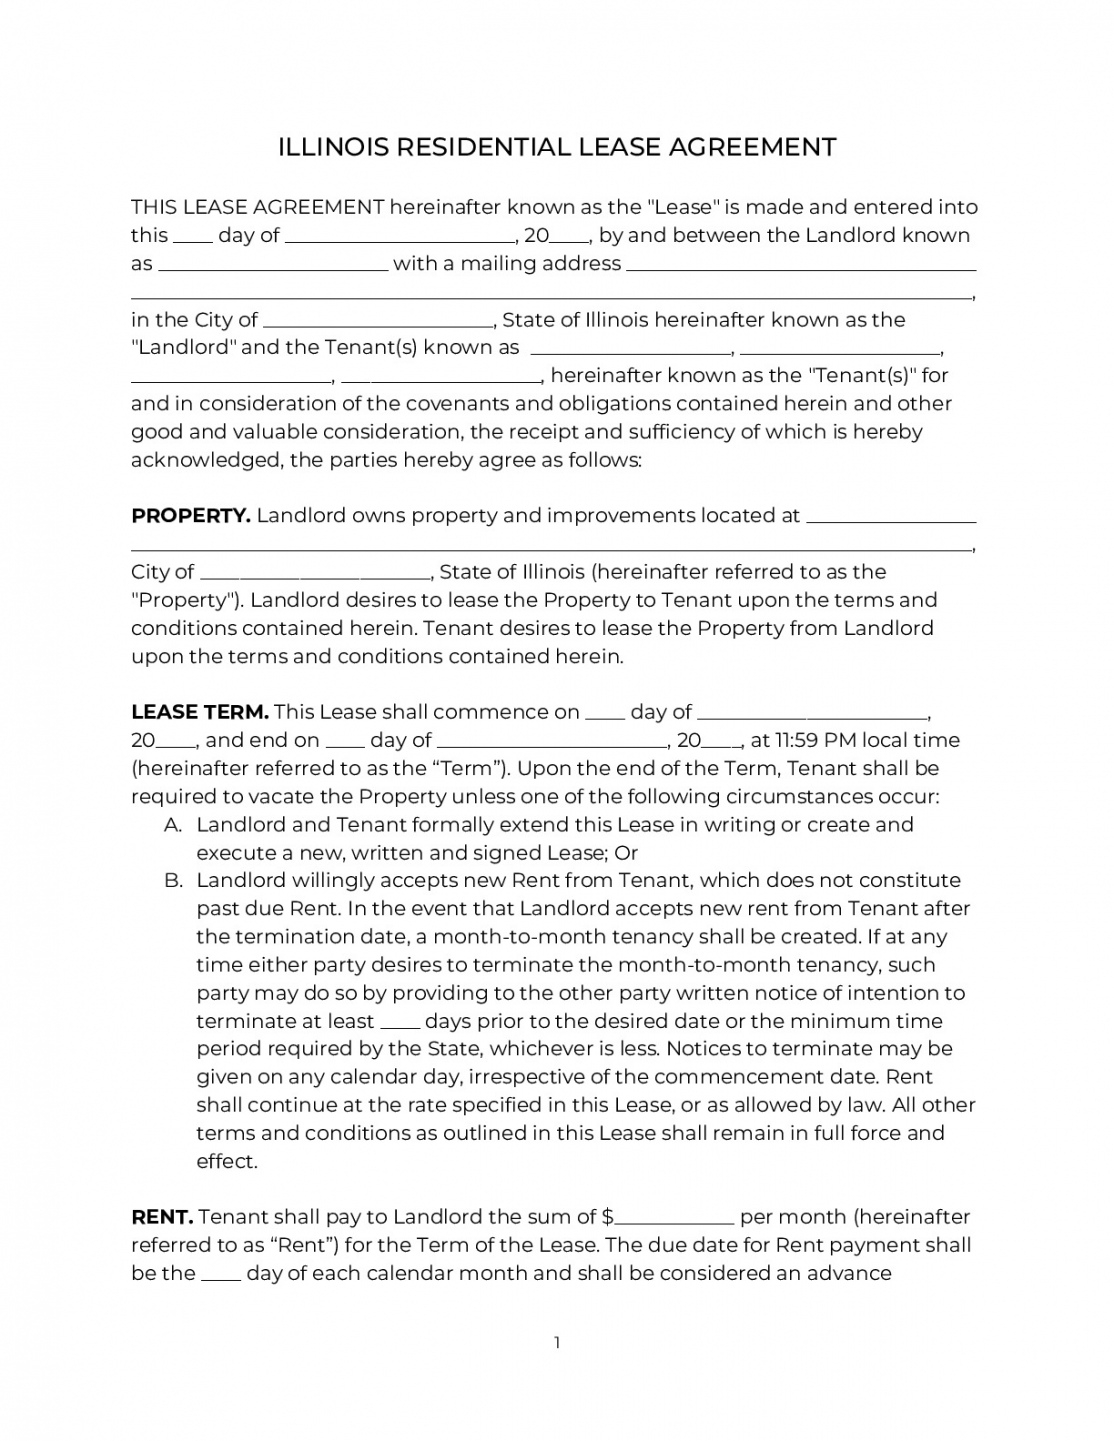 free official illinois residential lease agreement 2020 standard residential lease agreement template word